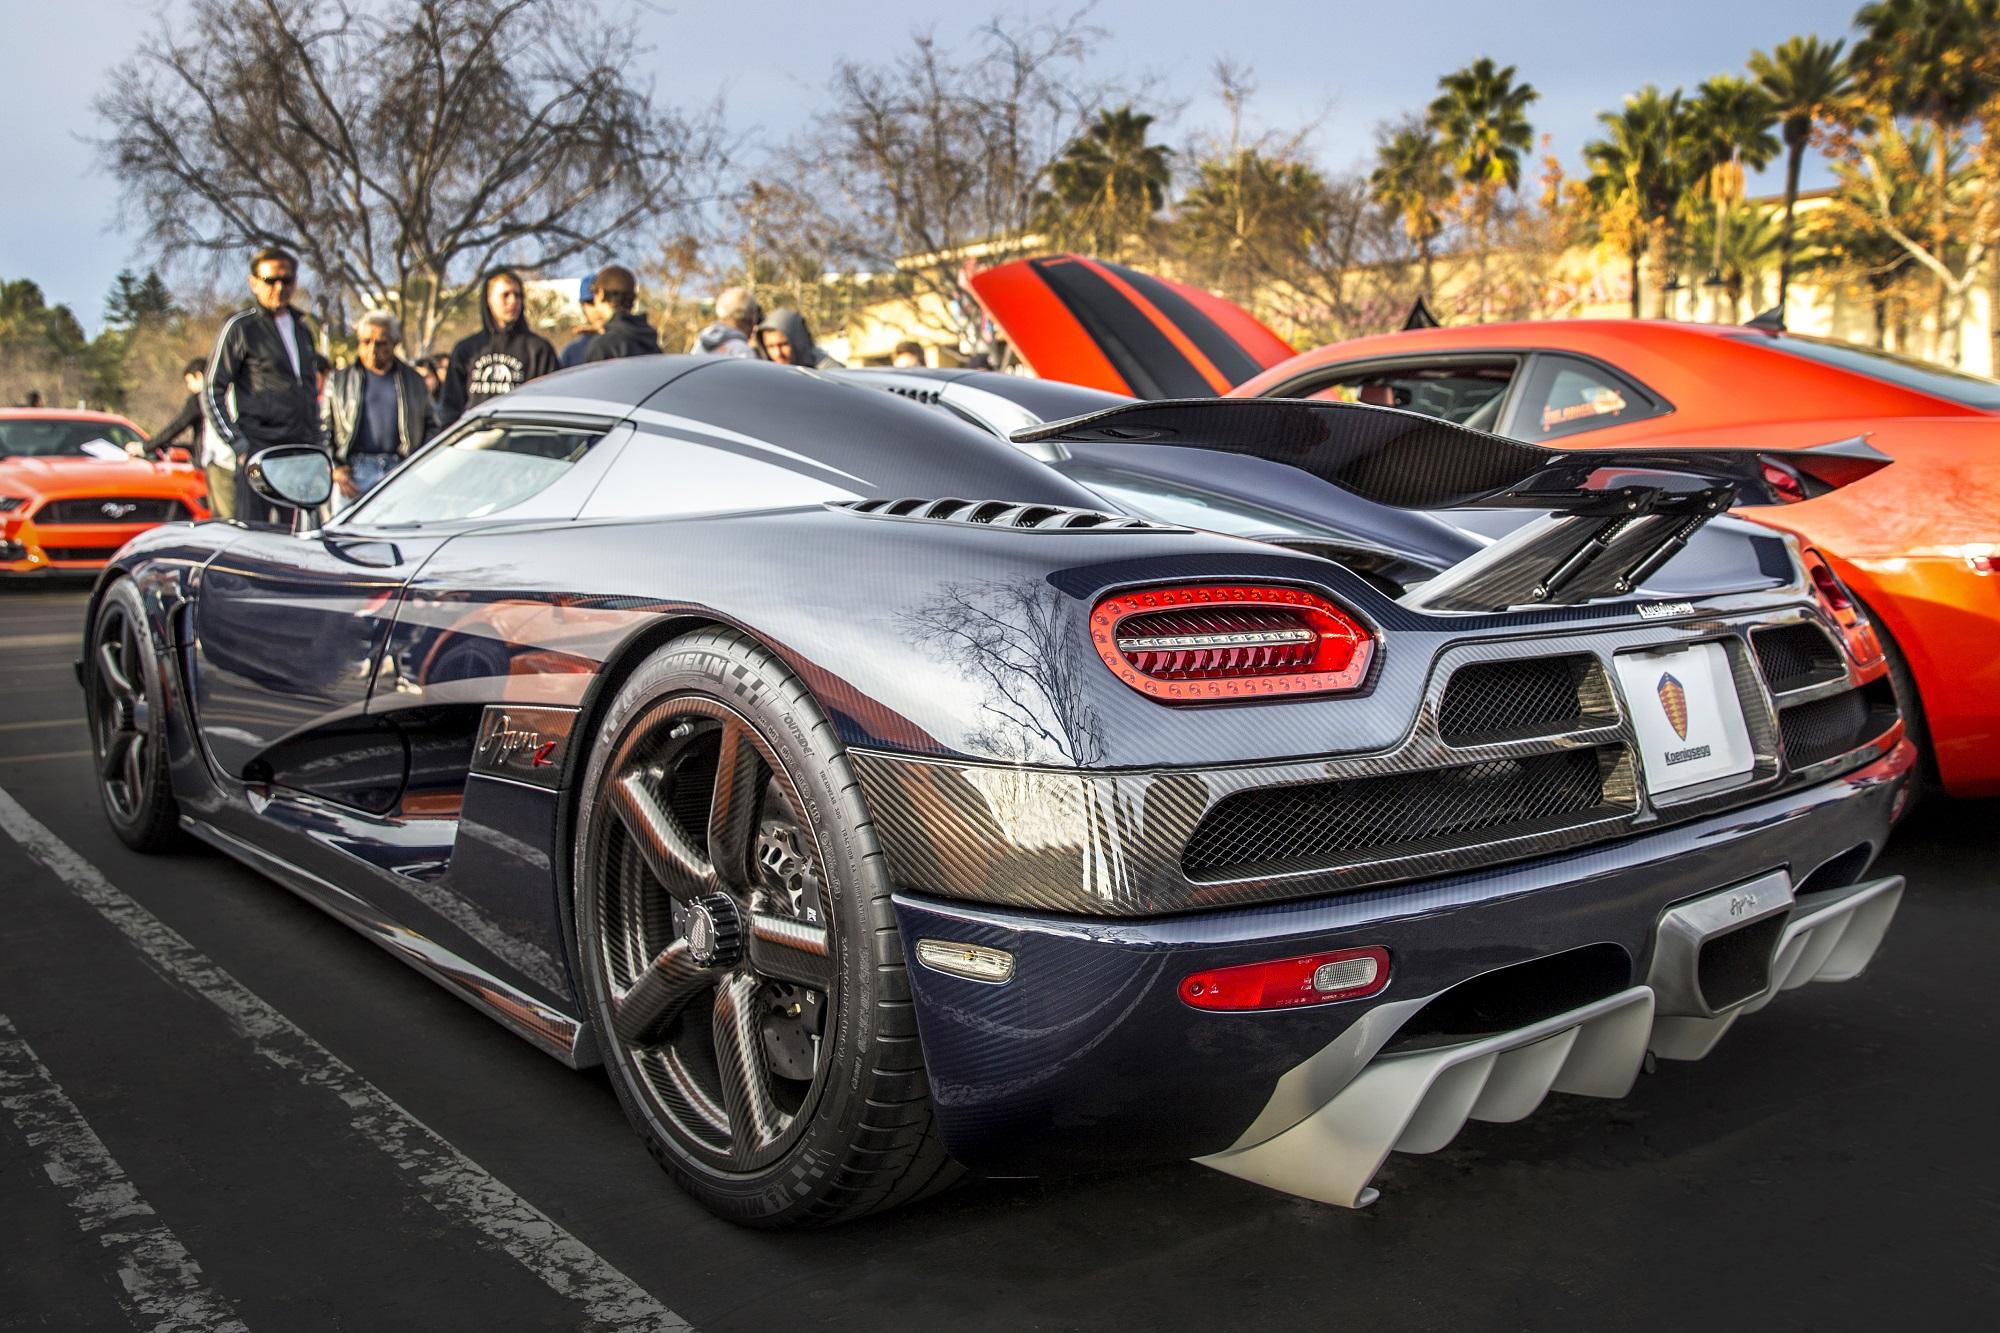 EXCLUSIVE: A look back at 'Thor's Hammer' Koenigsegg Agera R